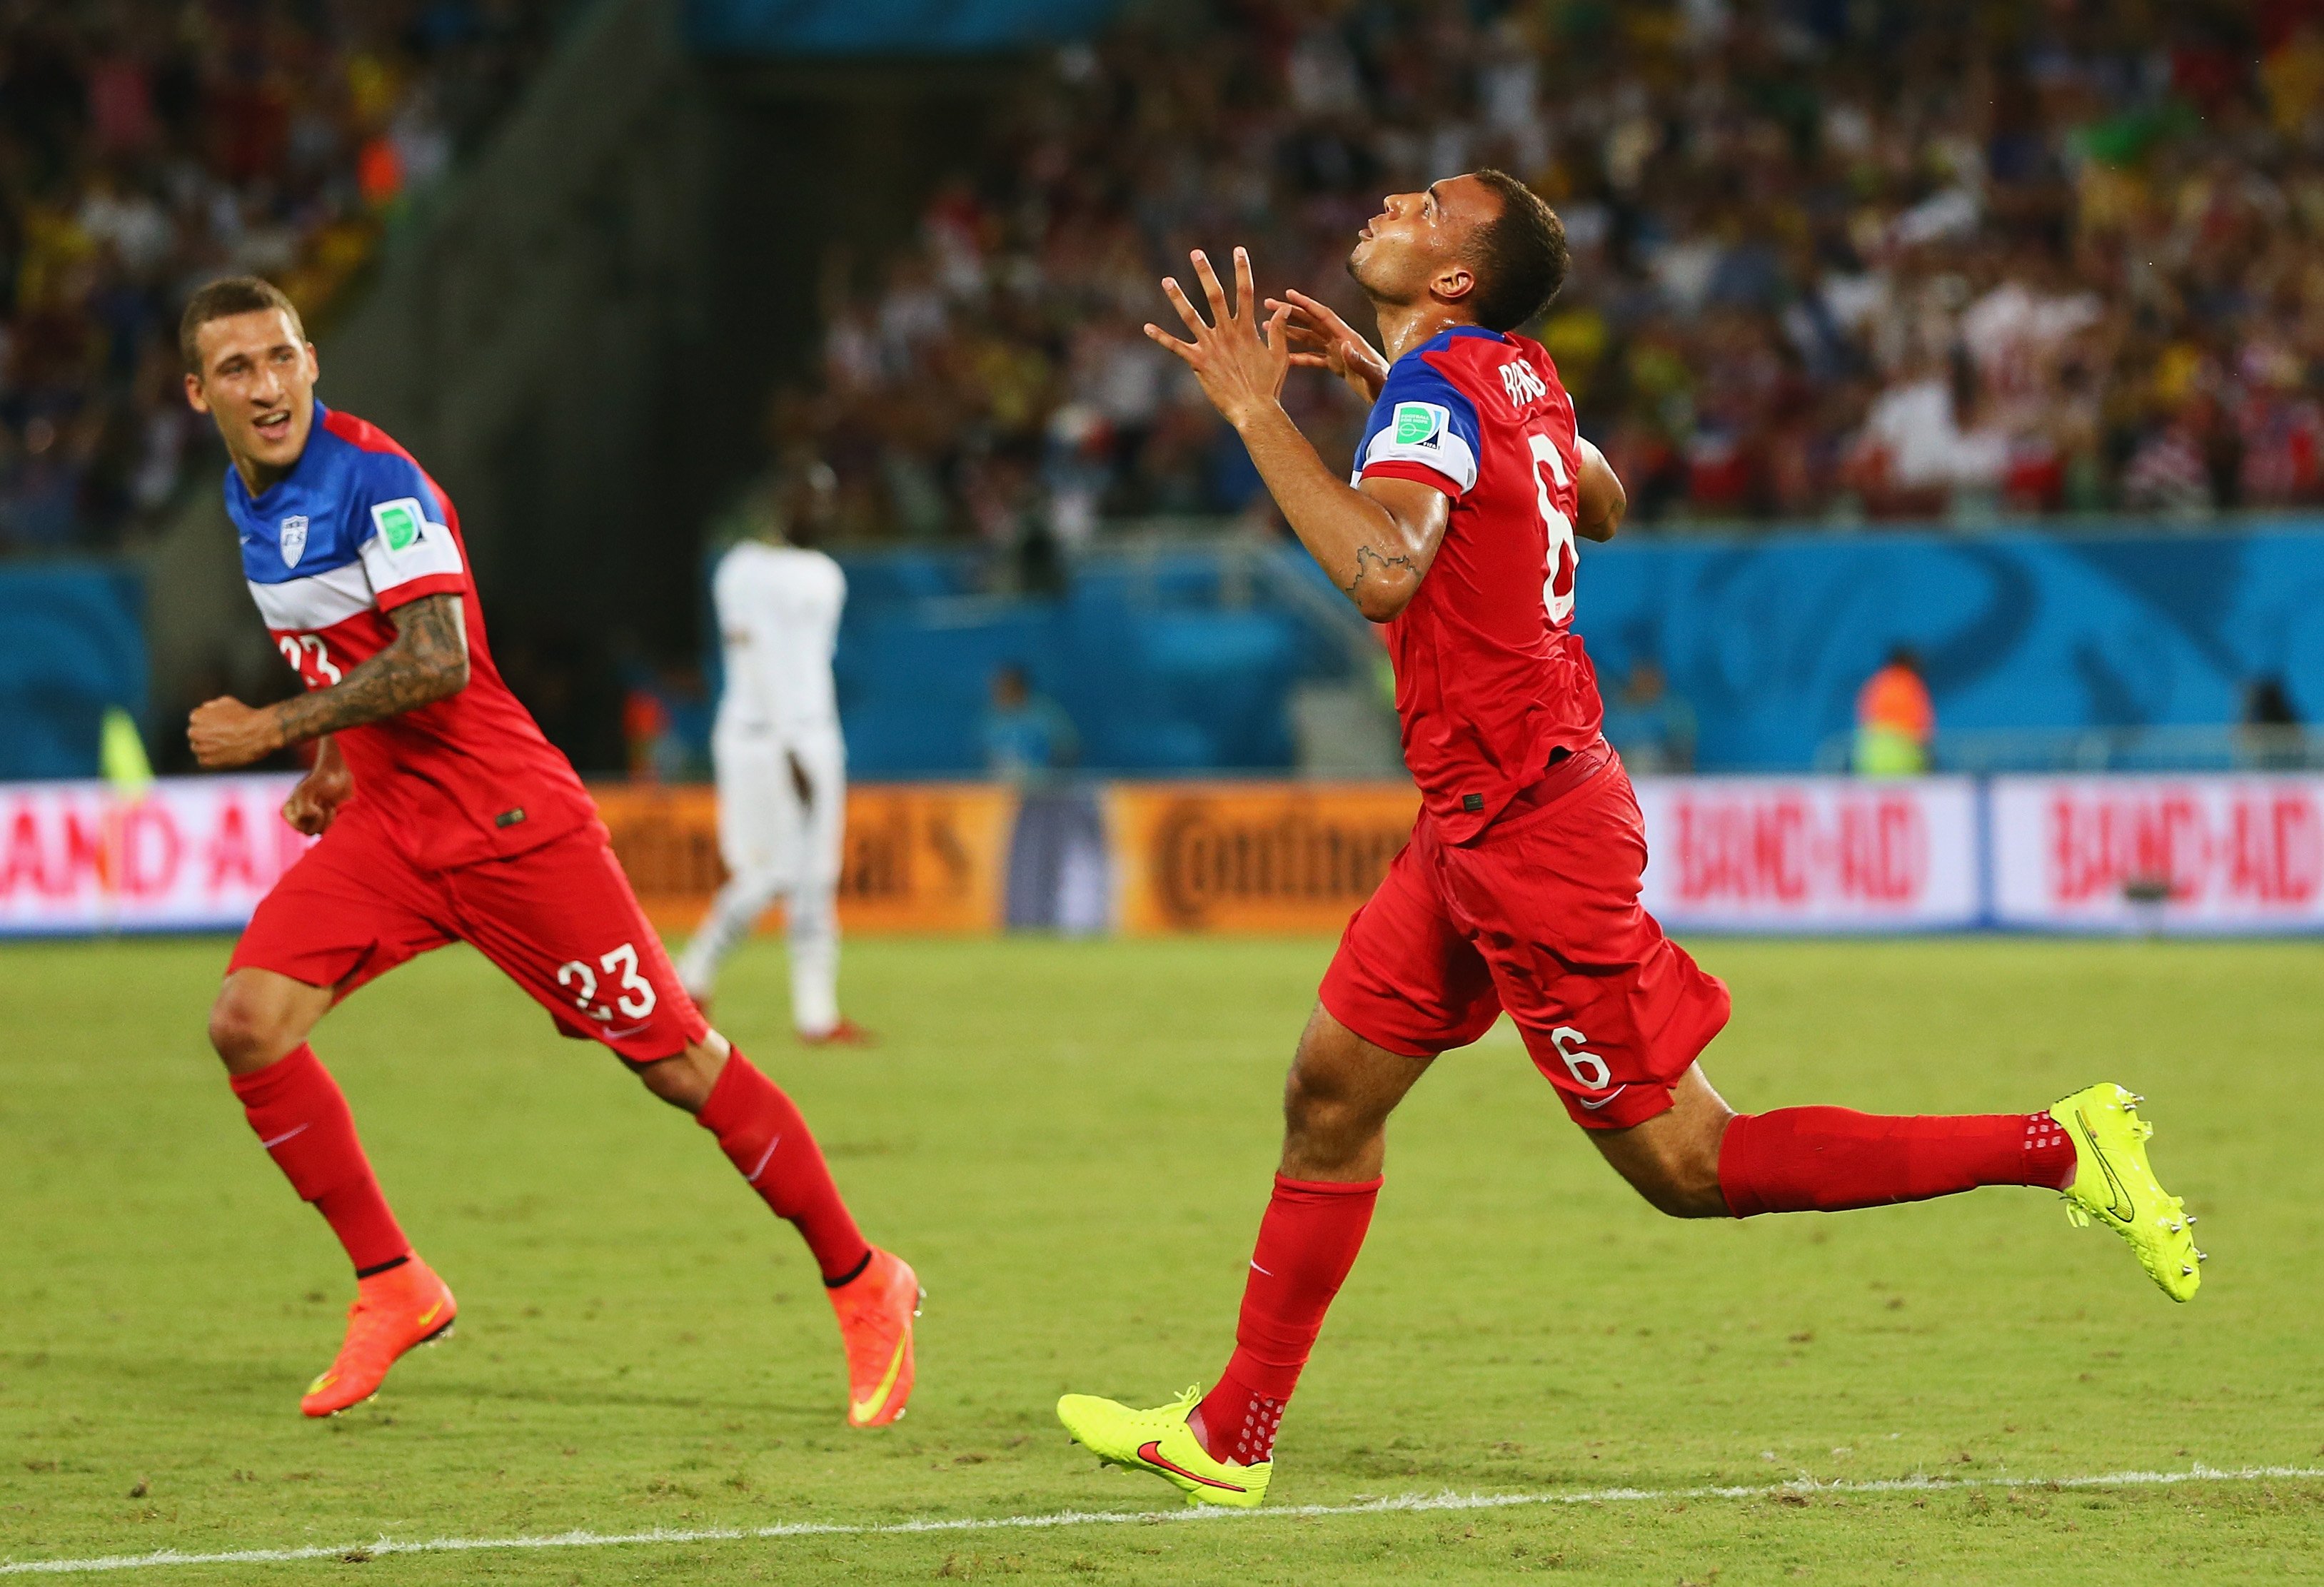 From right: John Brooks of the United States celebrates scoring his team's second goal with Fabian Johnson during the 2014 FIFA World Cup Brazil Group G match between Ghana and the United States at Estadio das Dunas on June 16, 2014 in Natal, Brazil. (Kevin C. Cox—Getty Images)